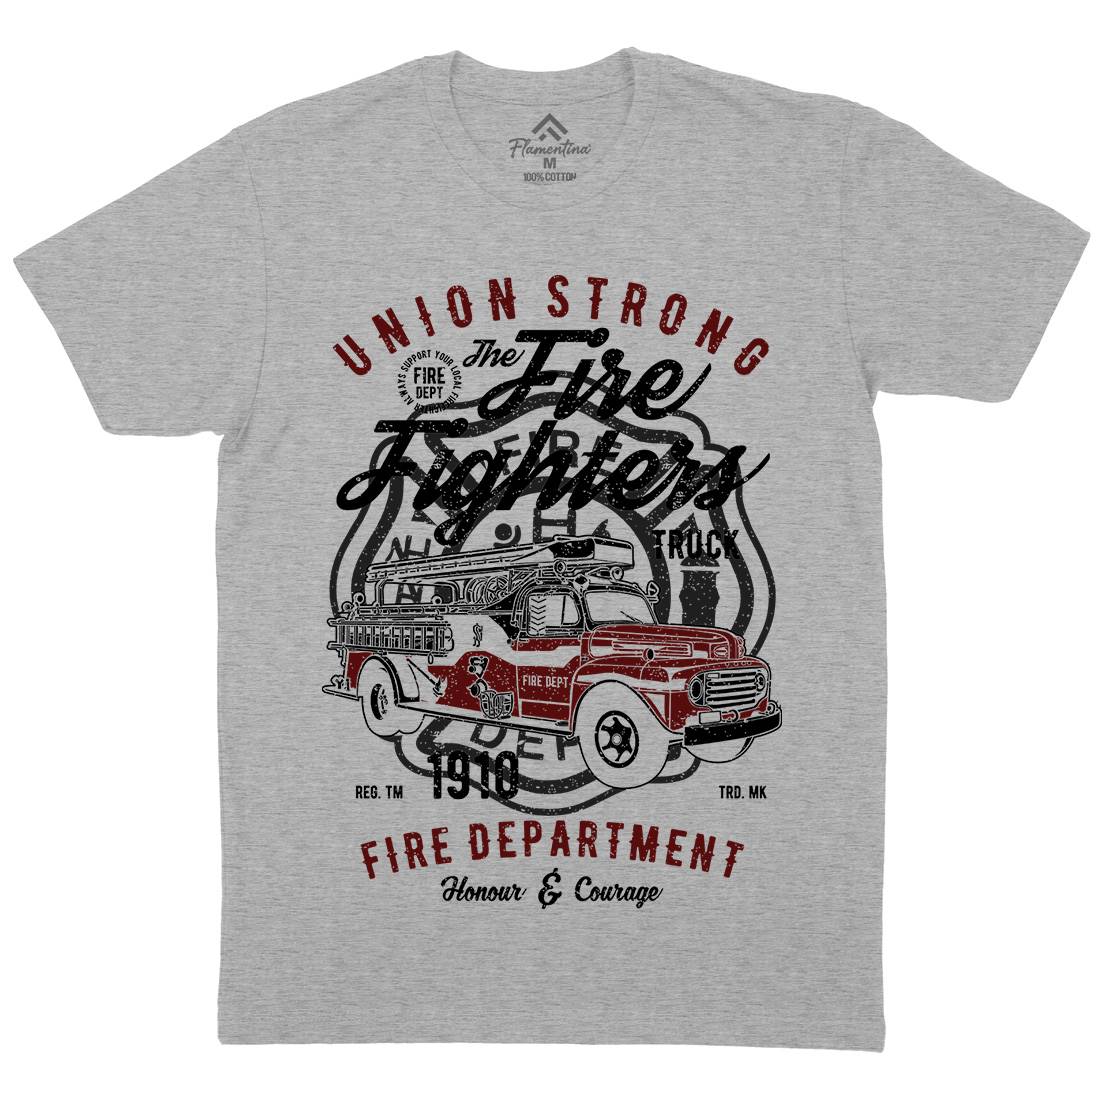 Union Strong Mens Crew Neck T-Shirt Firefighters A781